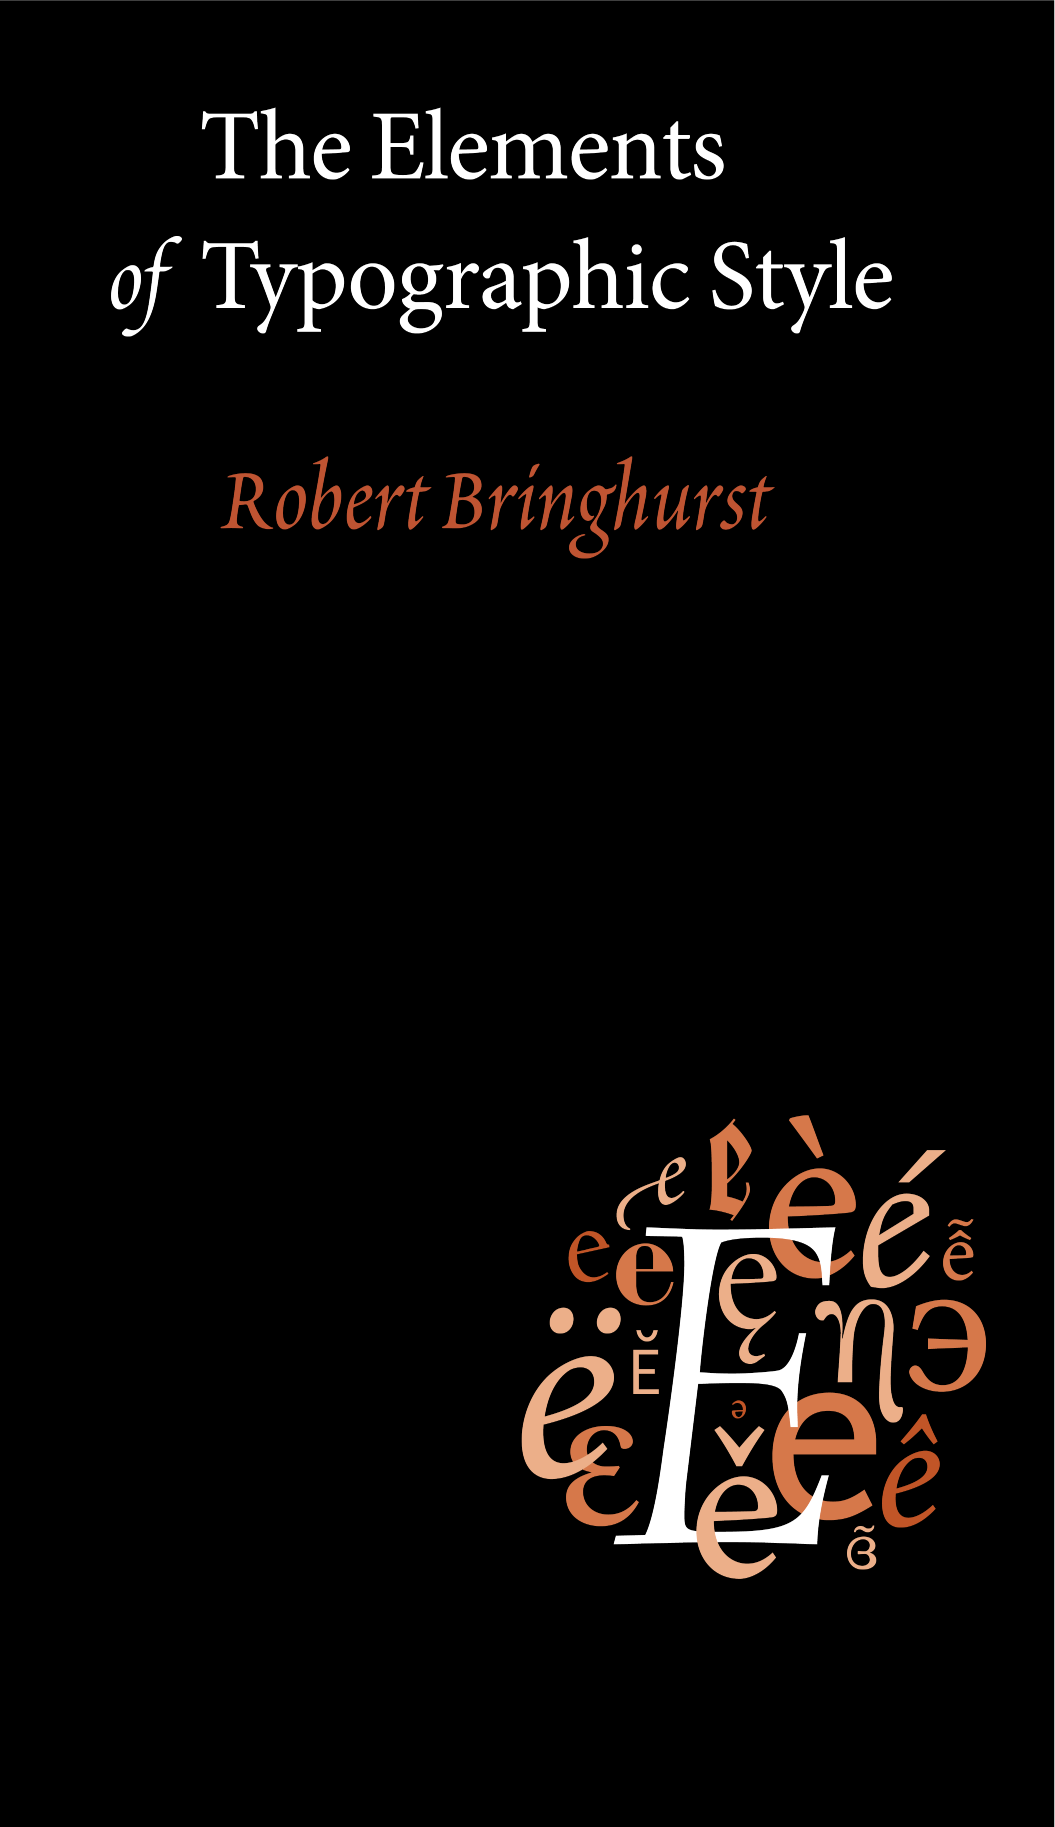 The cover of the book The Elements of Typographic Style, in which the background is black and the title is white. In the lower right corner is an a cluser of the letter 'e' in different languages and typefaces.